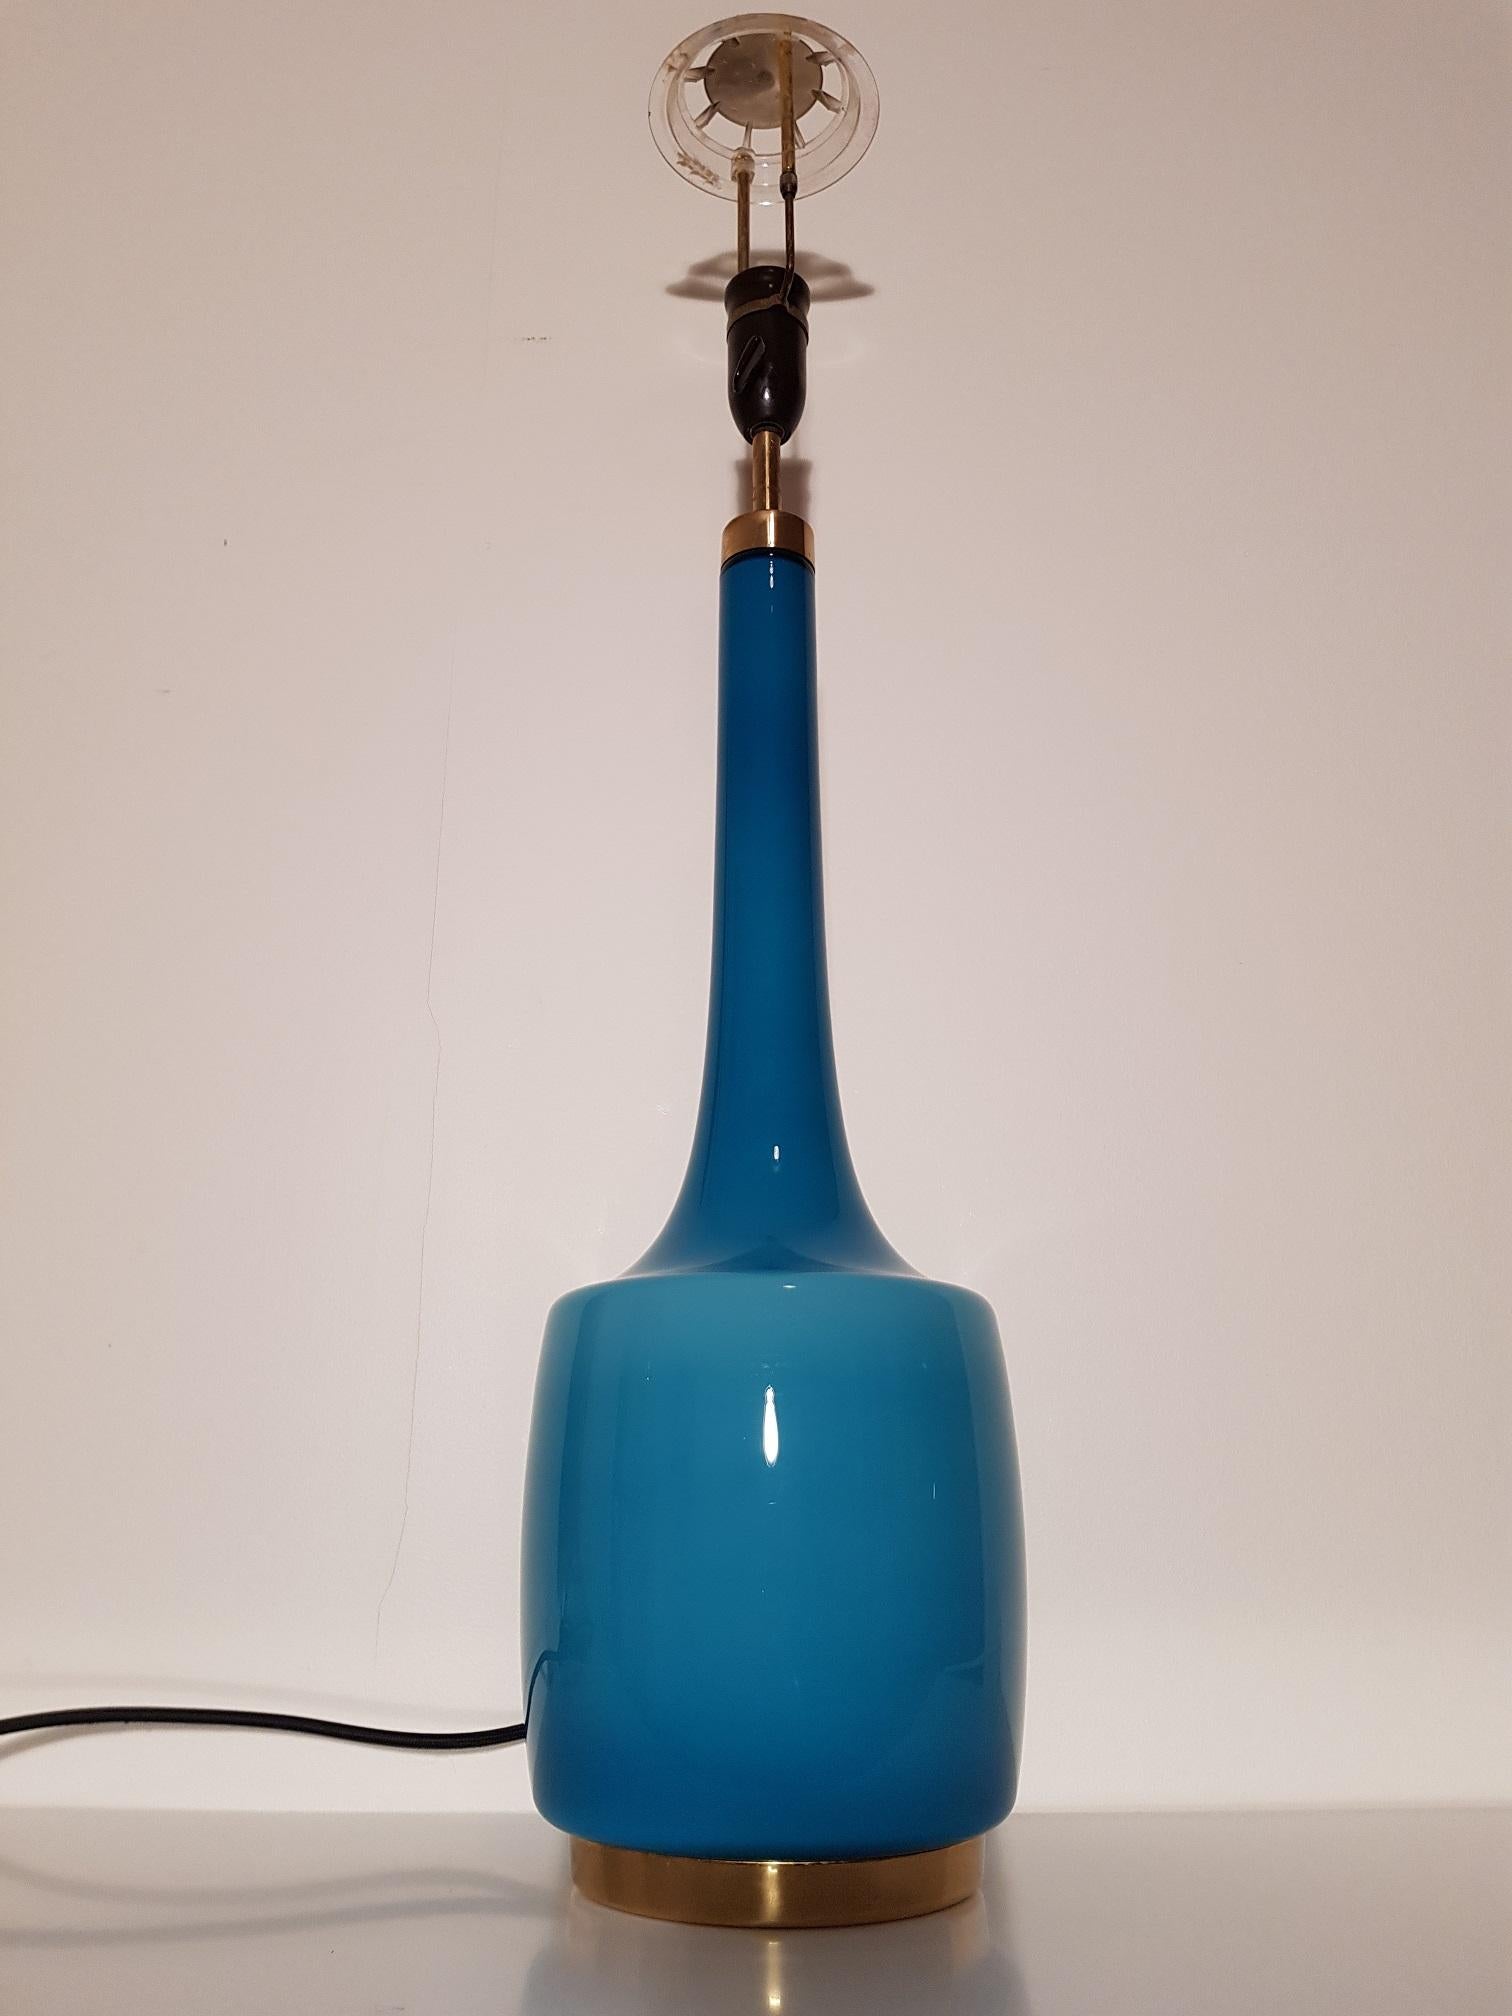 1 vintage table lamp in blue/turquoise opaline glass with brass fittings. Produced in the 1960s by Holm Sorensen & Co in Denmark. Designed by Danish artist Svend Aage Holm Sorensen. Classics design and a proud contribution to the Scandinavian